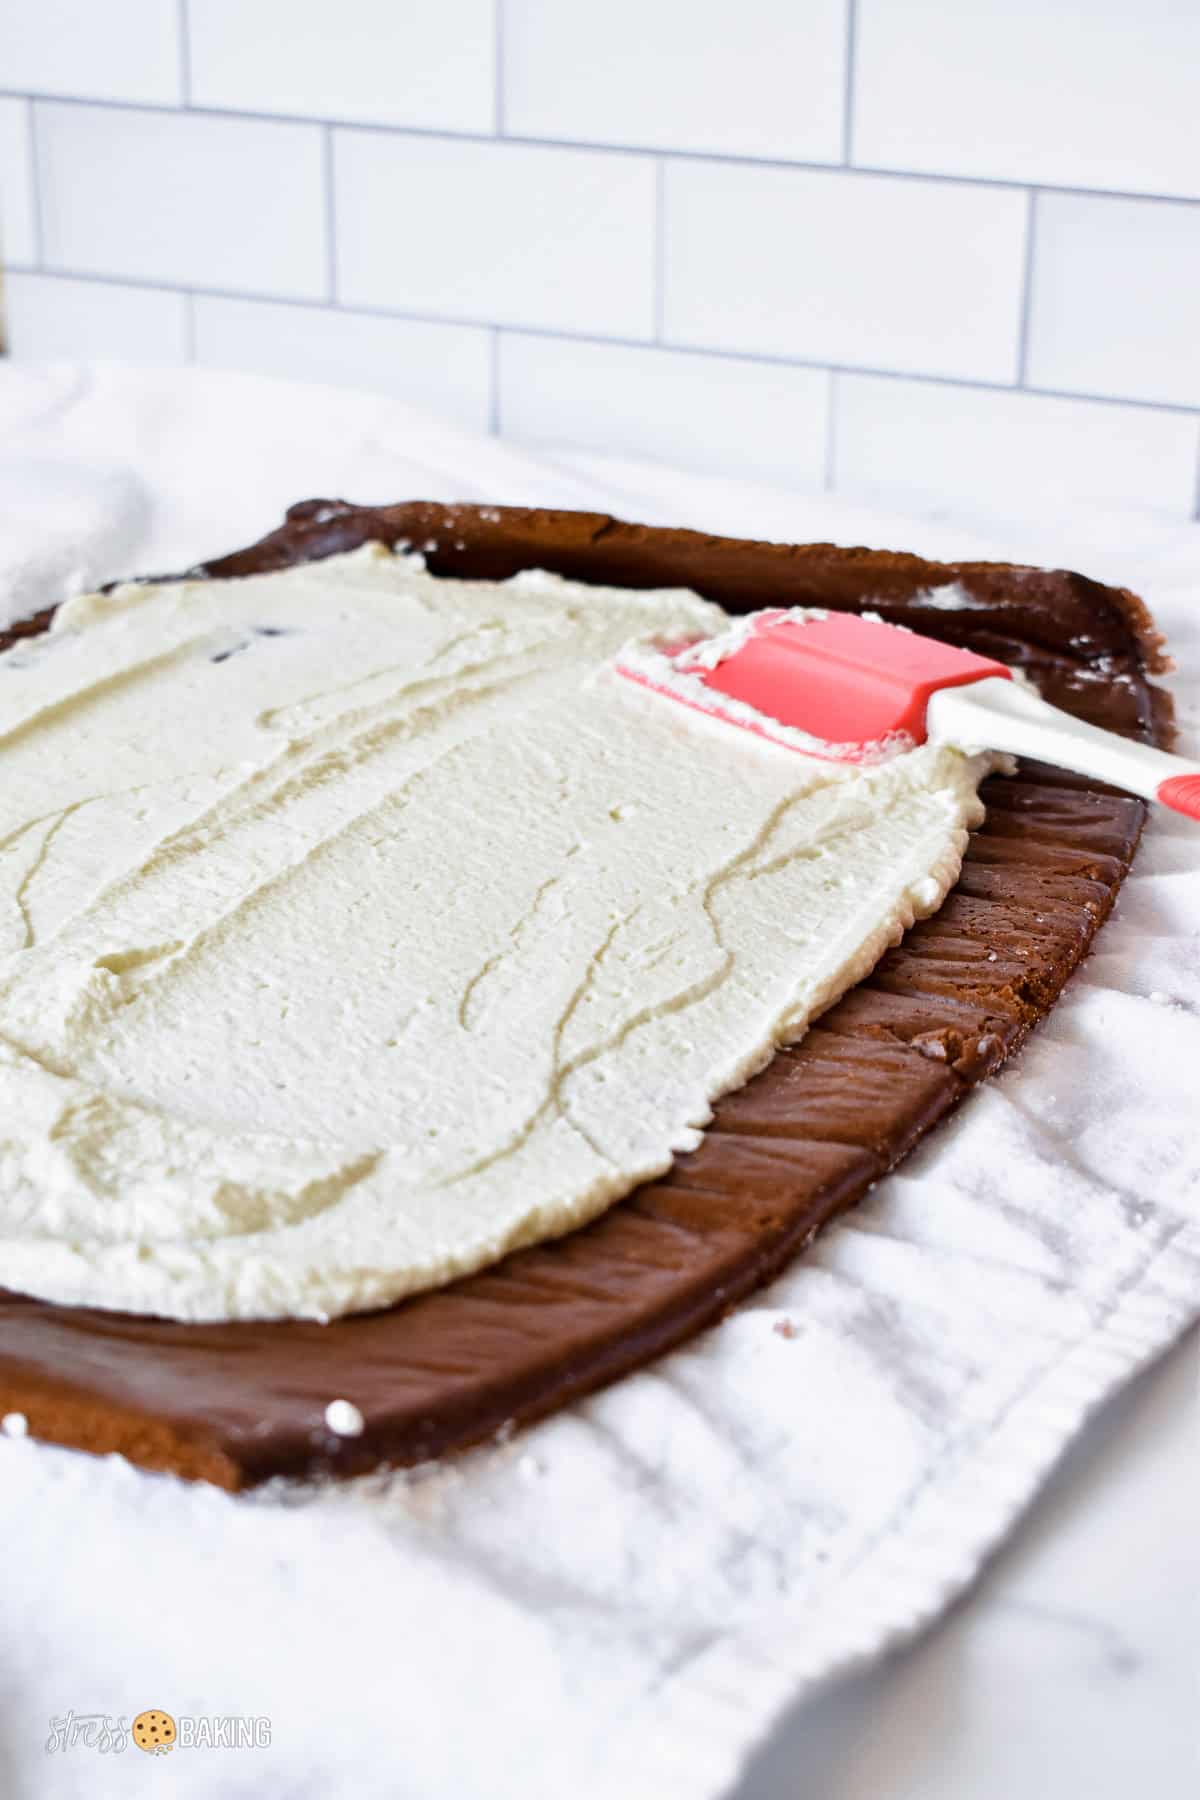 Spreading whipped cream on a thin layer of chocolate cake